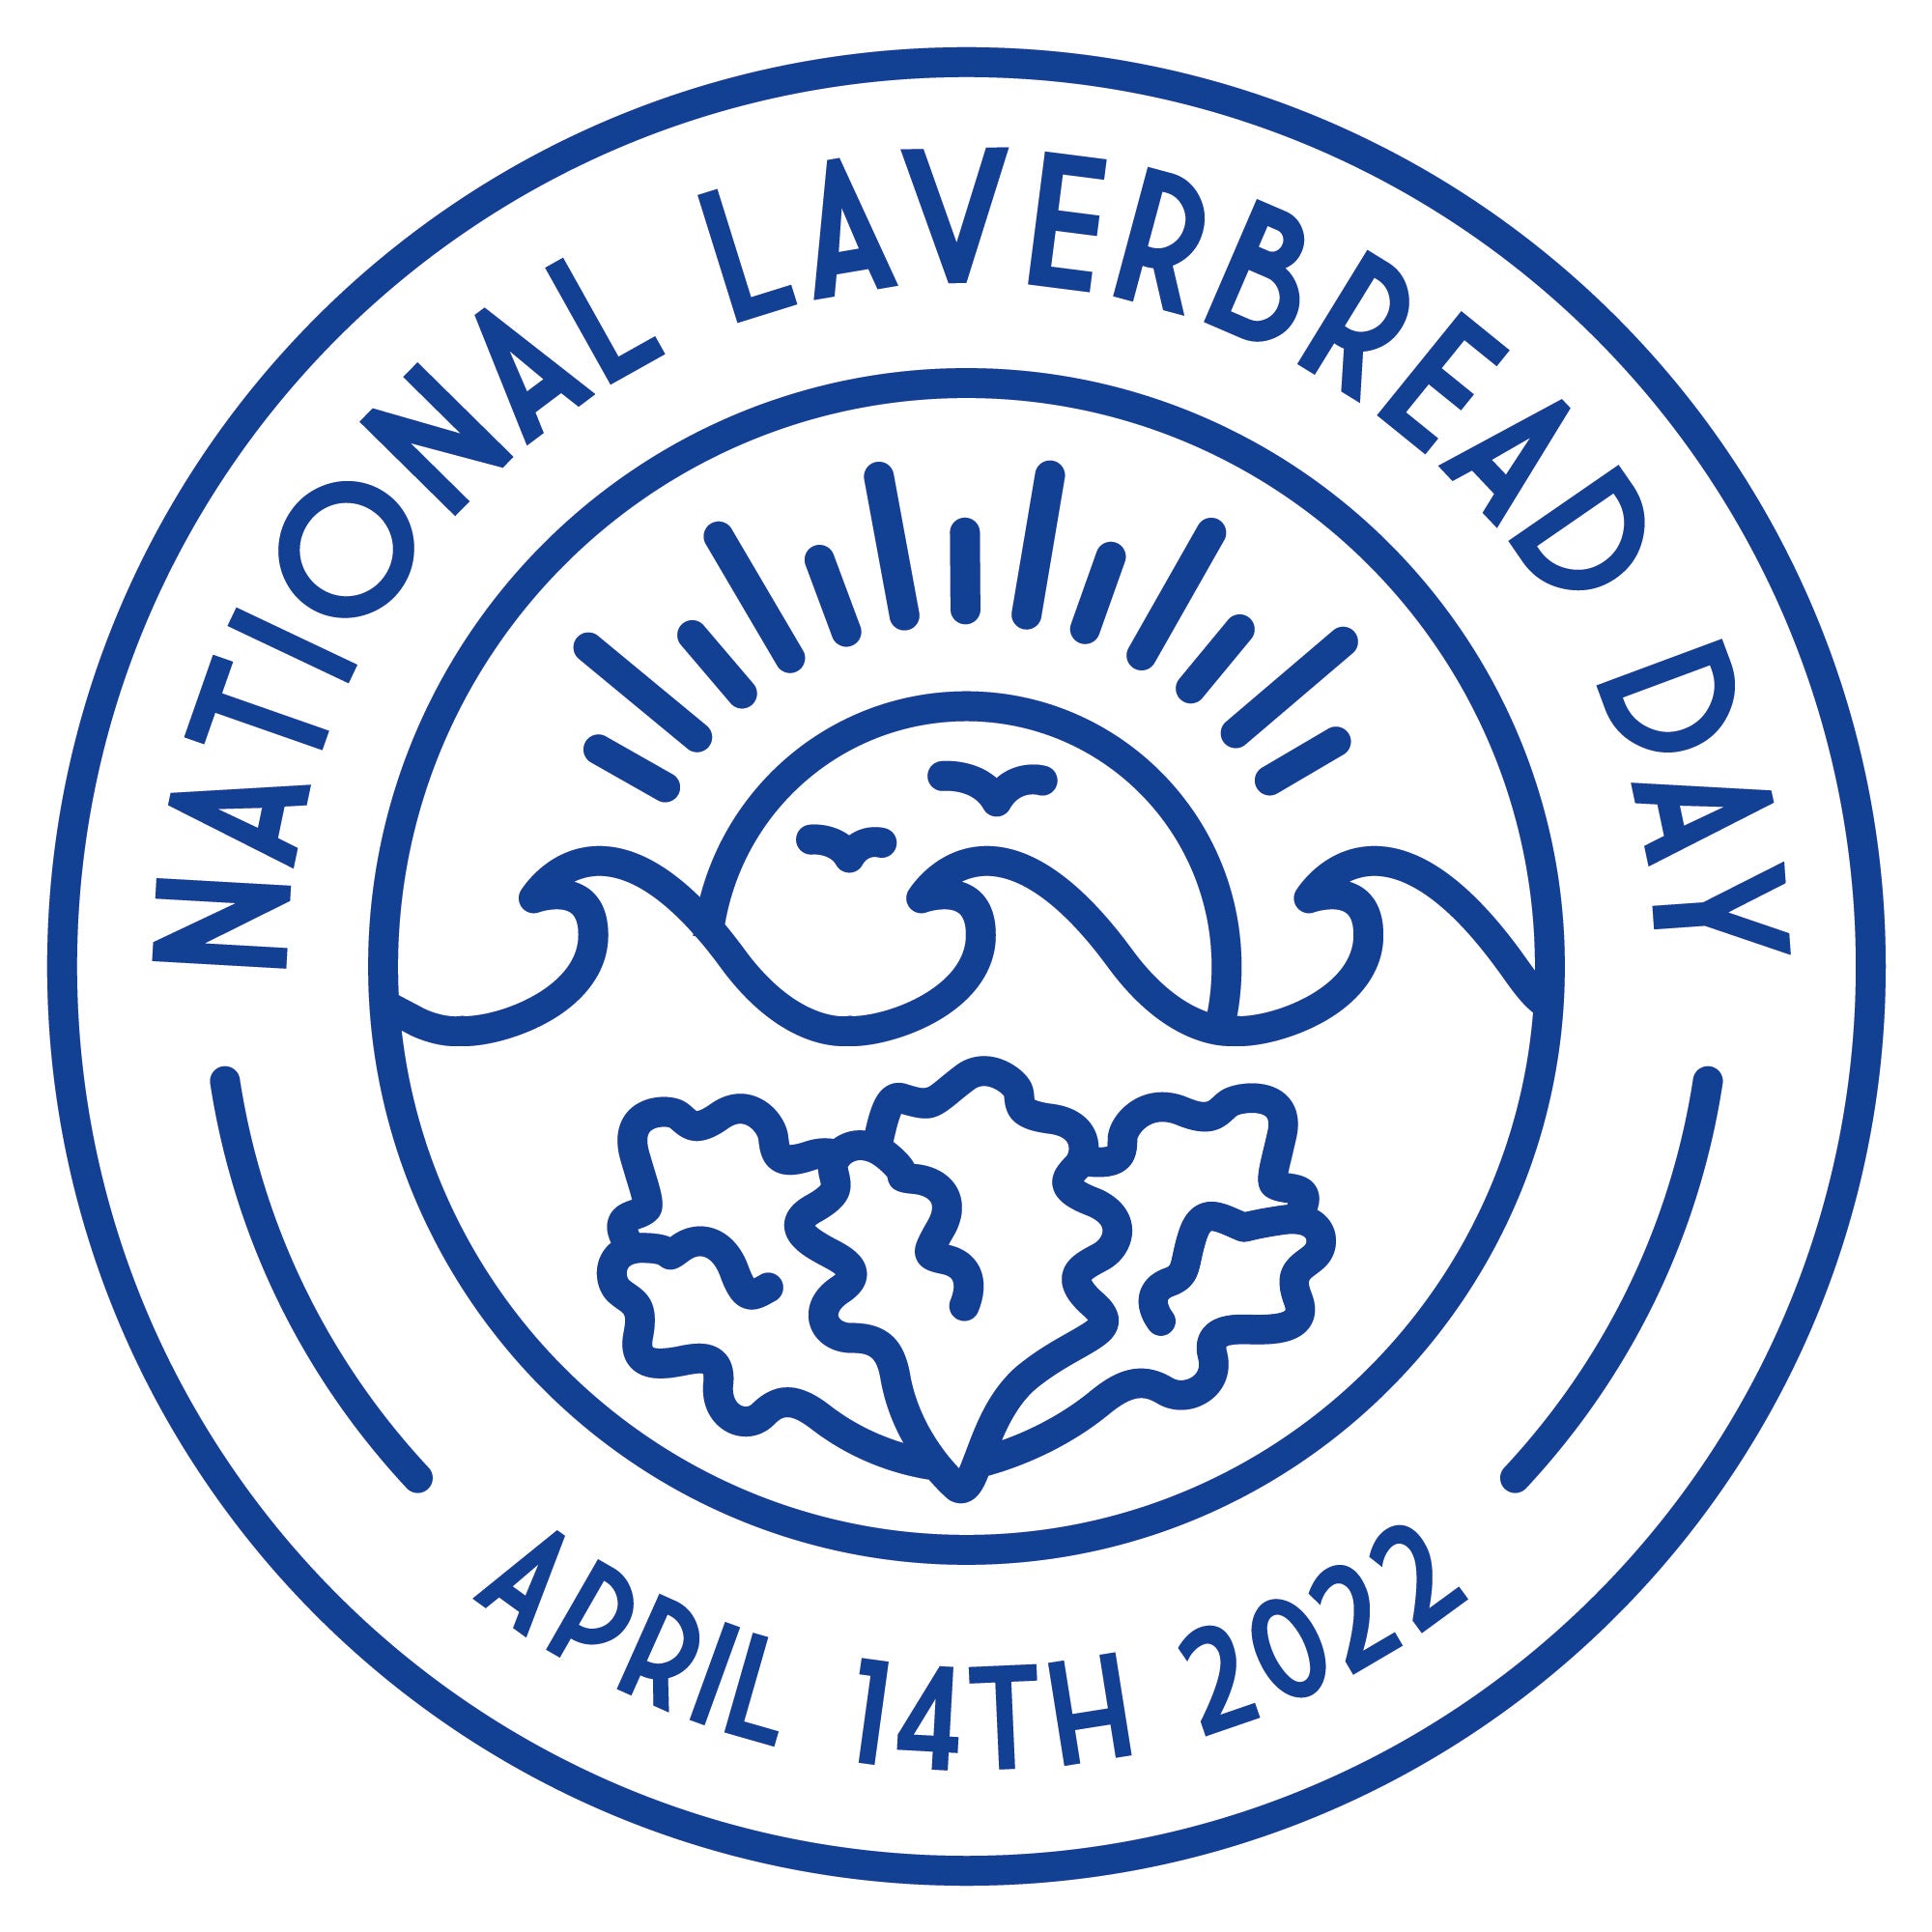 WE DECLARE NATIONAL LAVERBREAD DAY!   14th APRIL